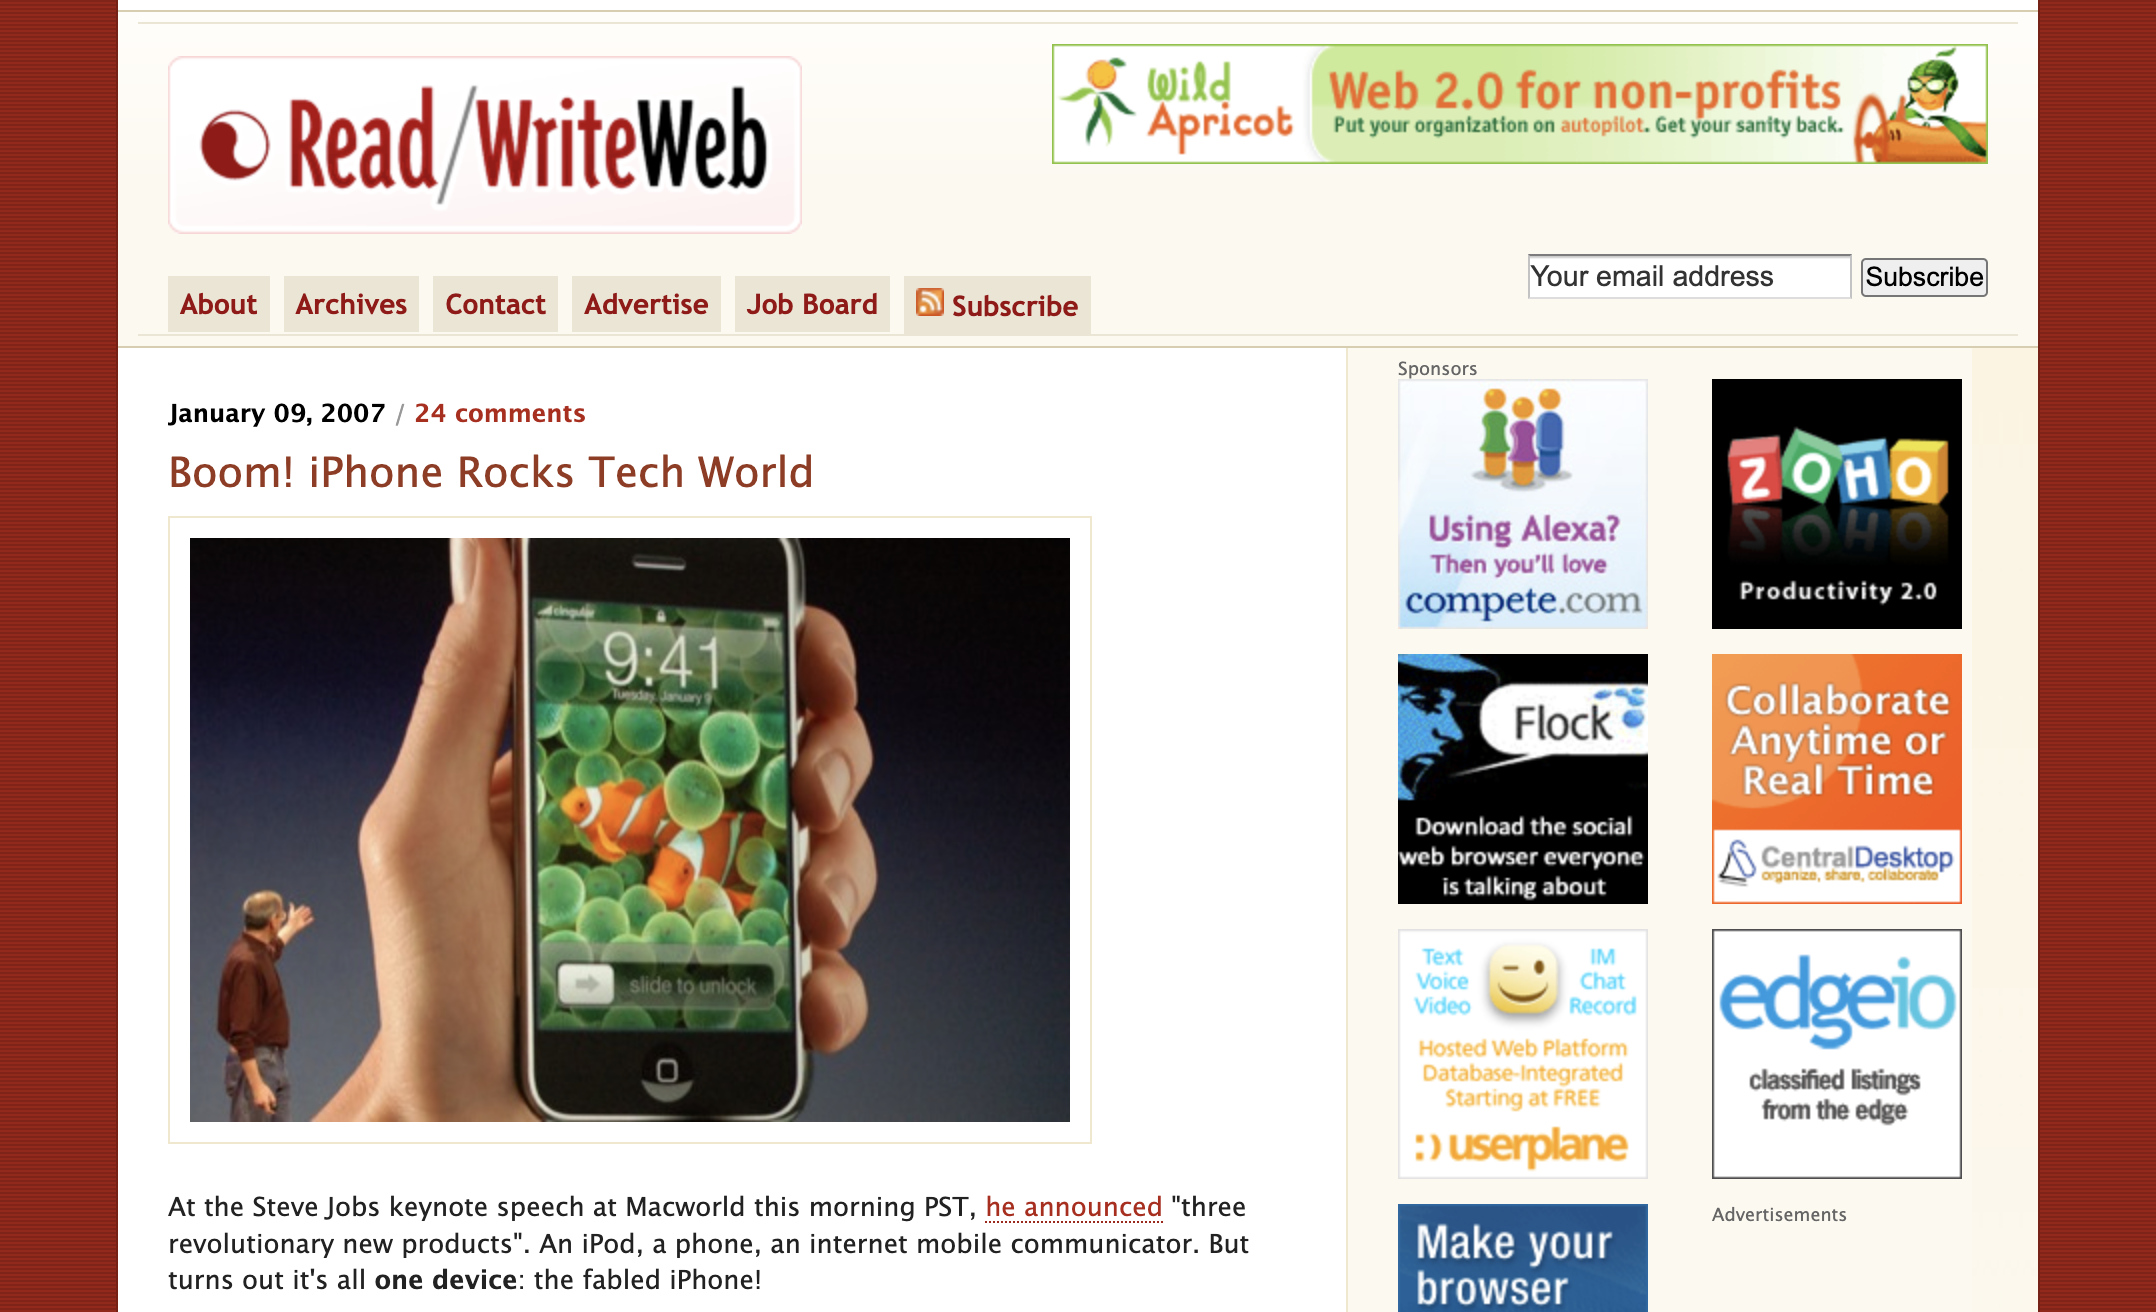 Read/WriteWeb blog post after the iPhone was announced in January 2007.